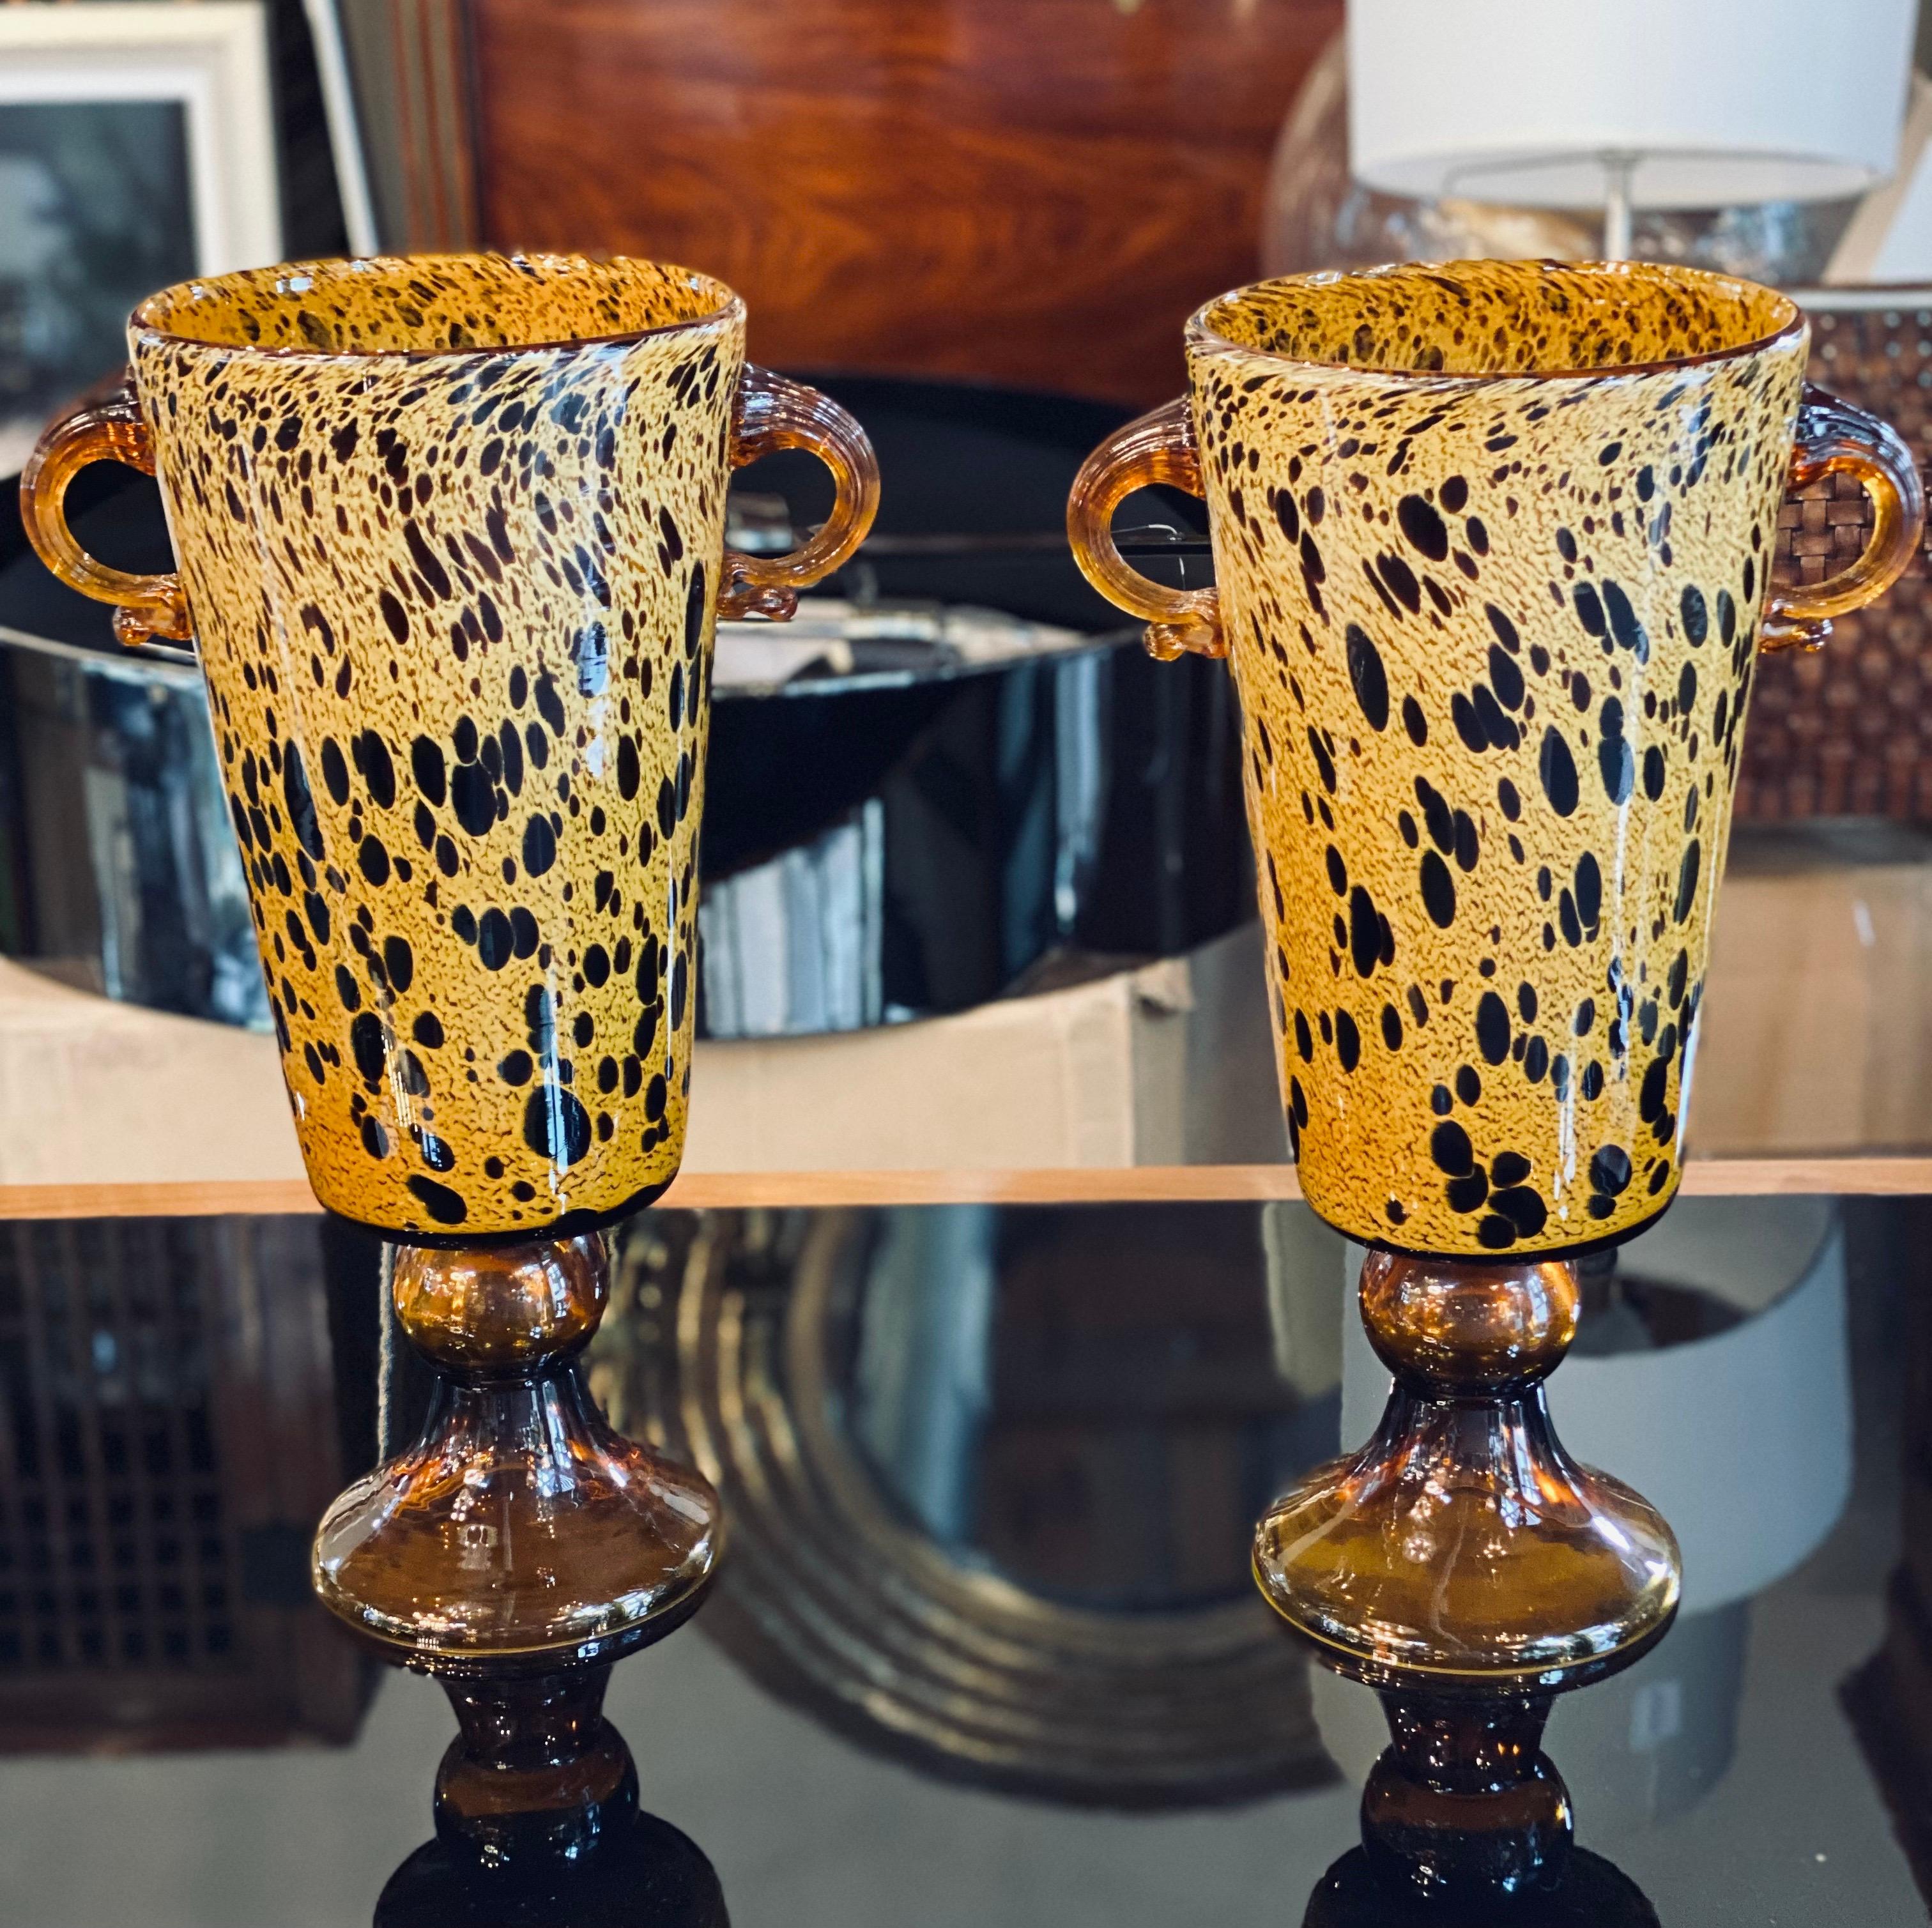 Murano pair of spotted amber vases with hoop handles

11